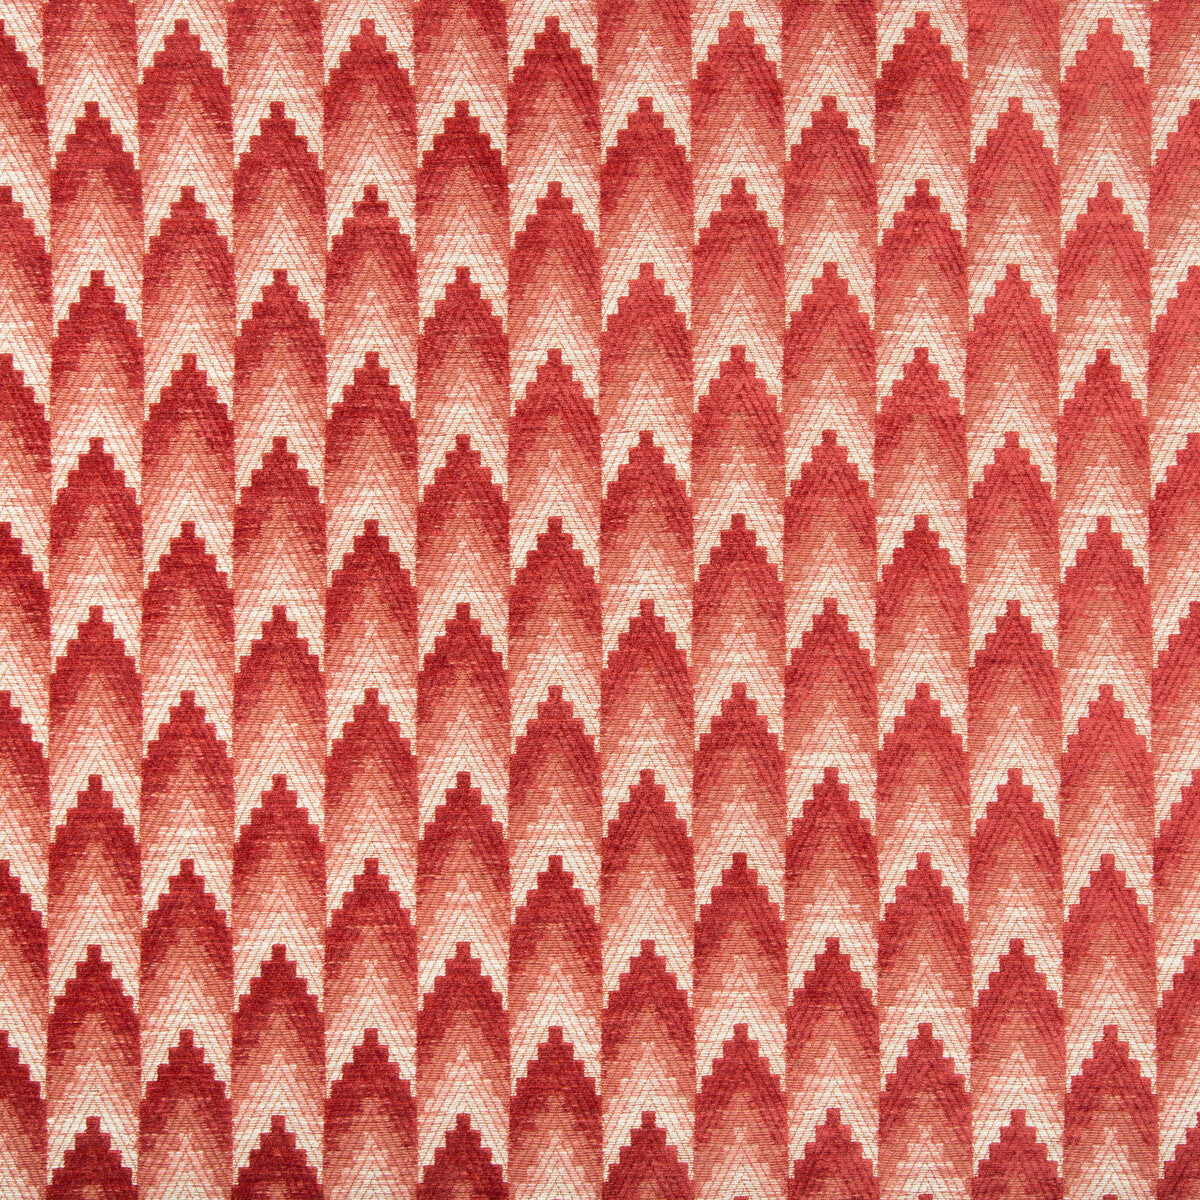 Ventron Woven fabric in red color - pattern 8019118.19.0 - by Brunschwig &amp; Fils in the Alsace Weaves collection